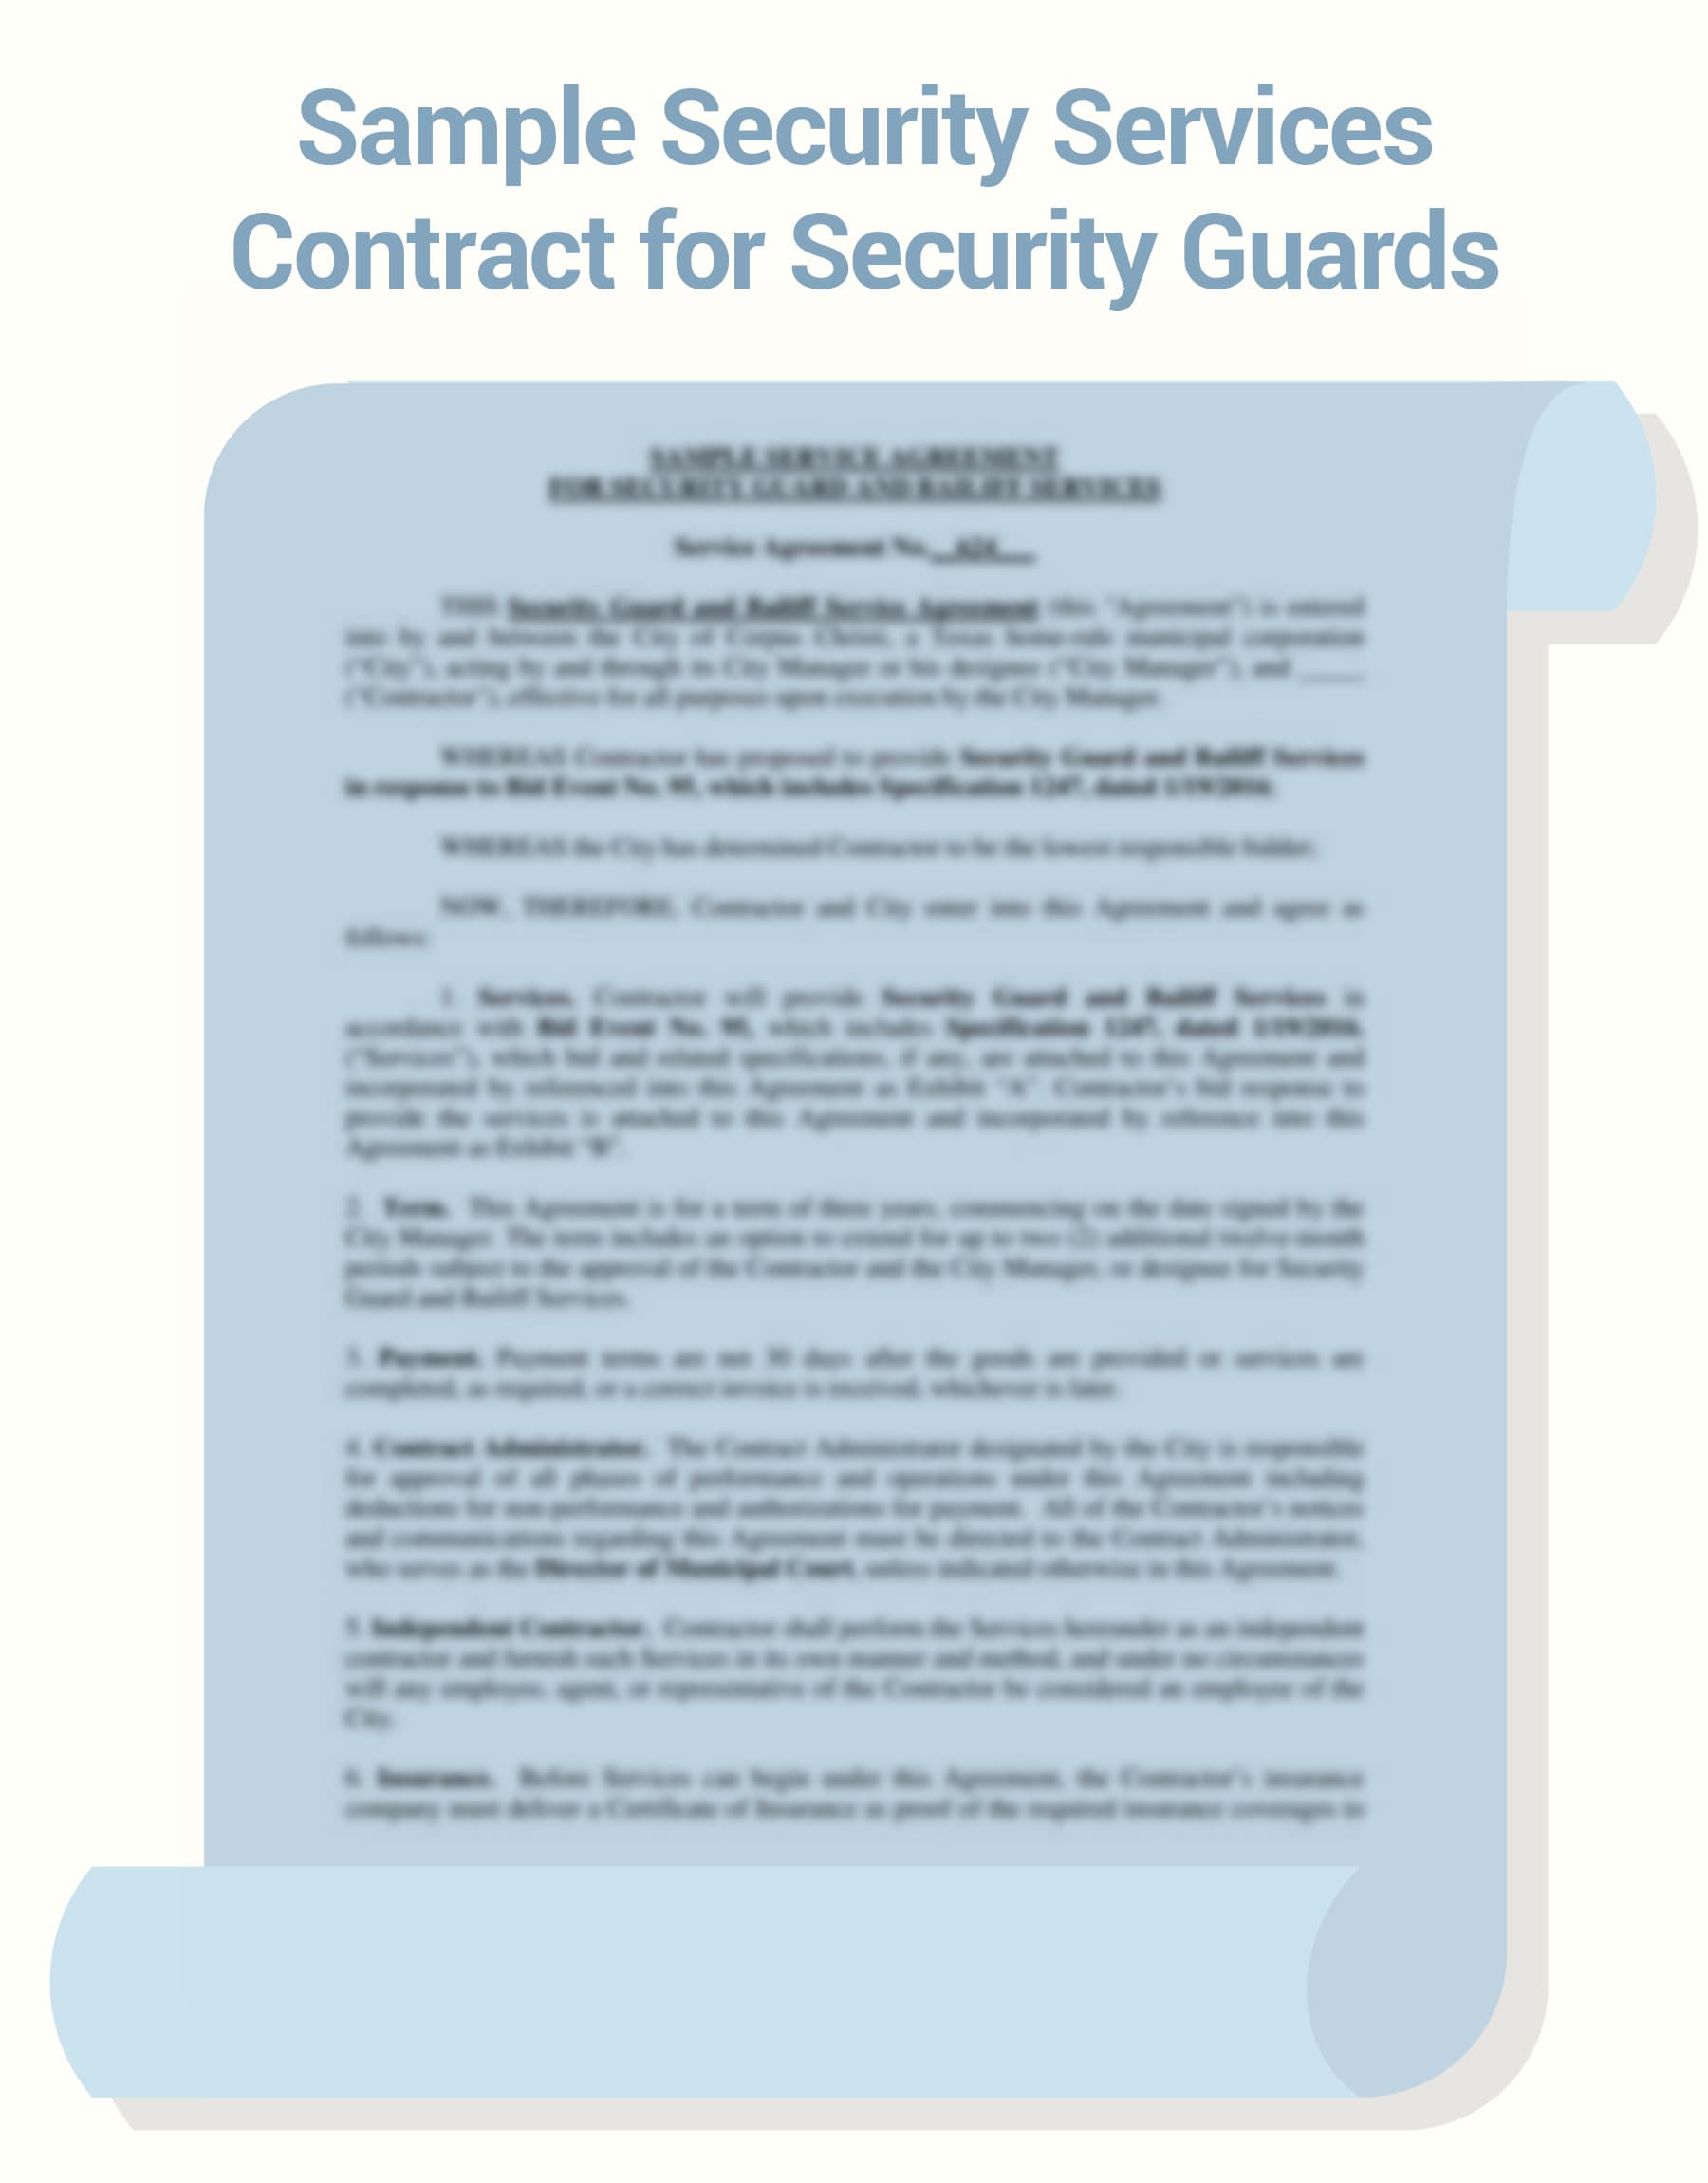 Sample Security Services Contract for Security Guards